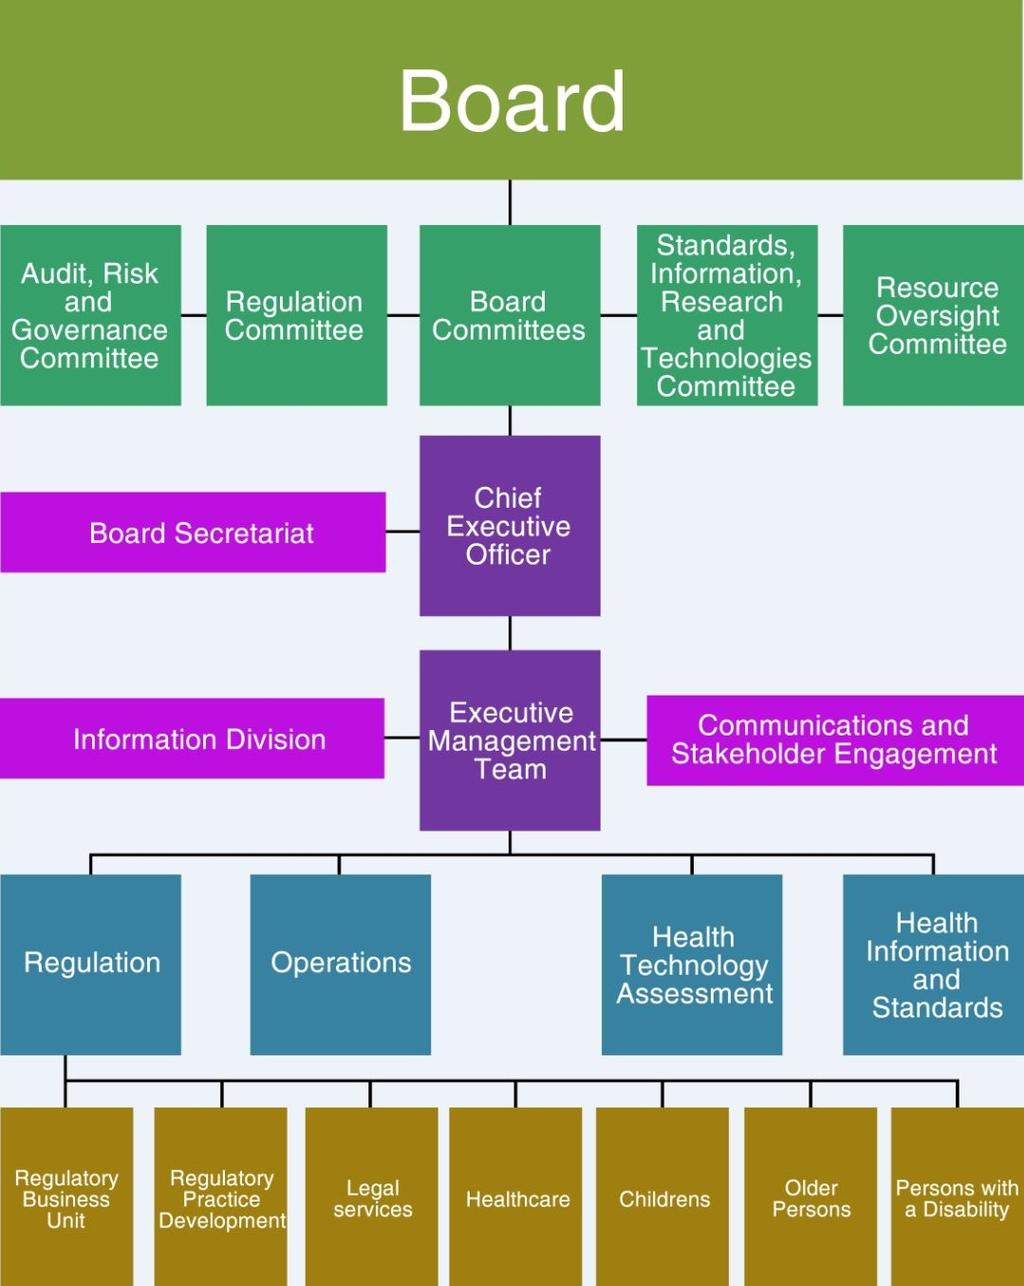 Governing structure of HIQA The overall strategy, priorities and governance arrangements of HIQA are directed by its Board, the members of which are appointed by the Minister for Health.